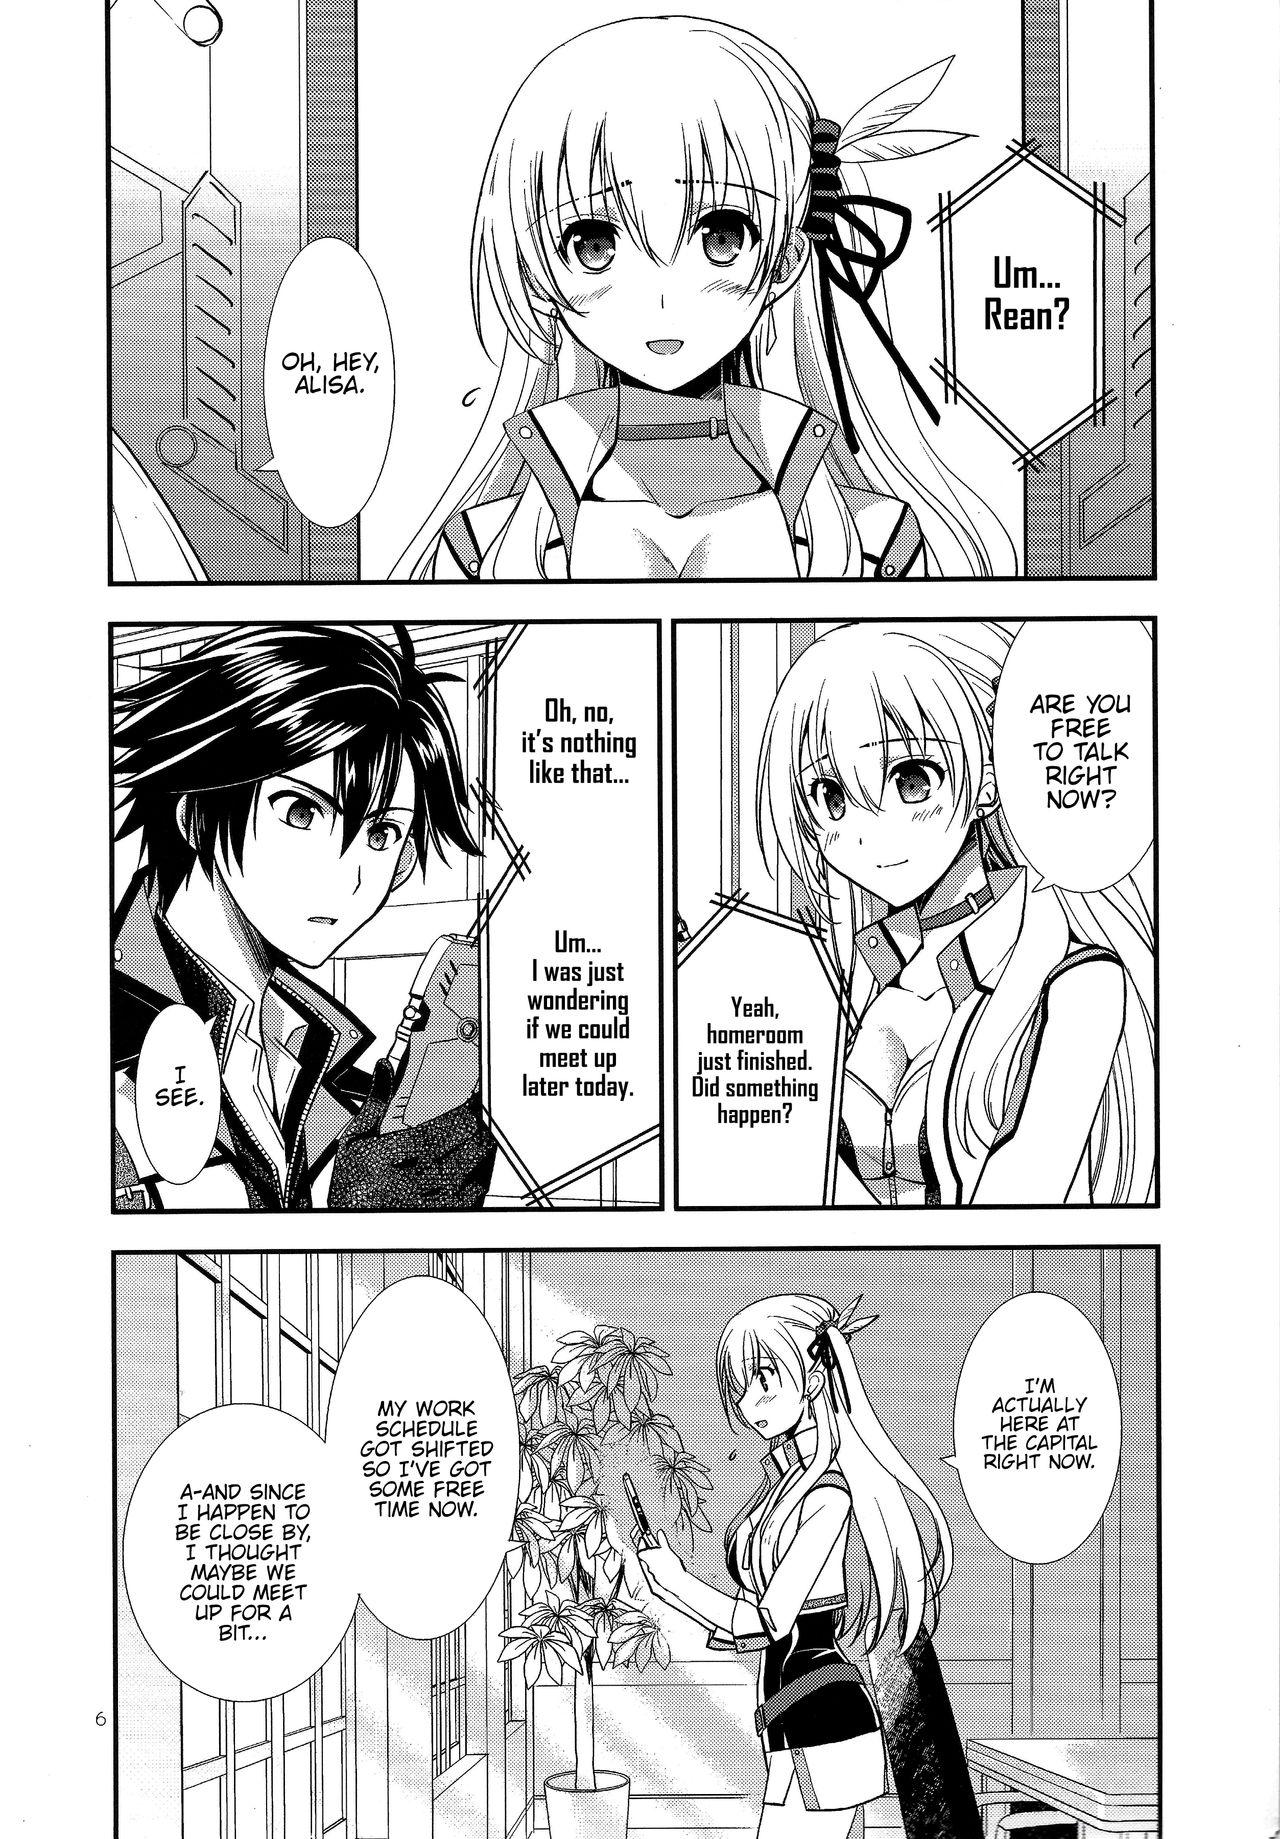 First Houkago Date - The legend of heroes | eiyuu densetsu Masseuse - Page 4